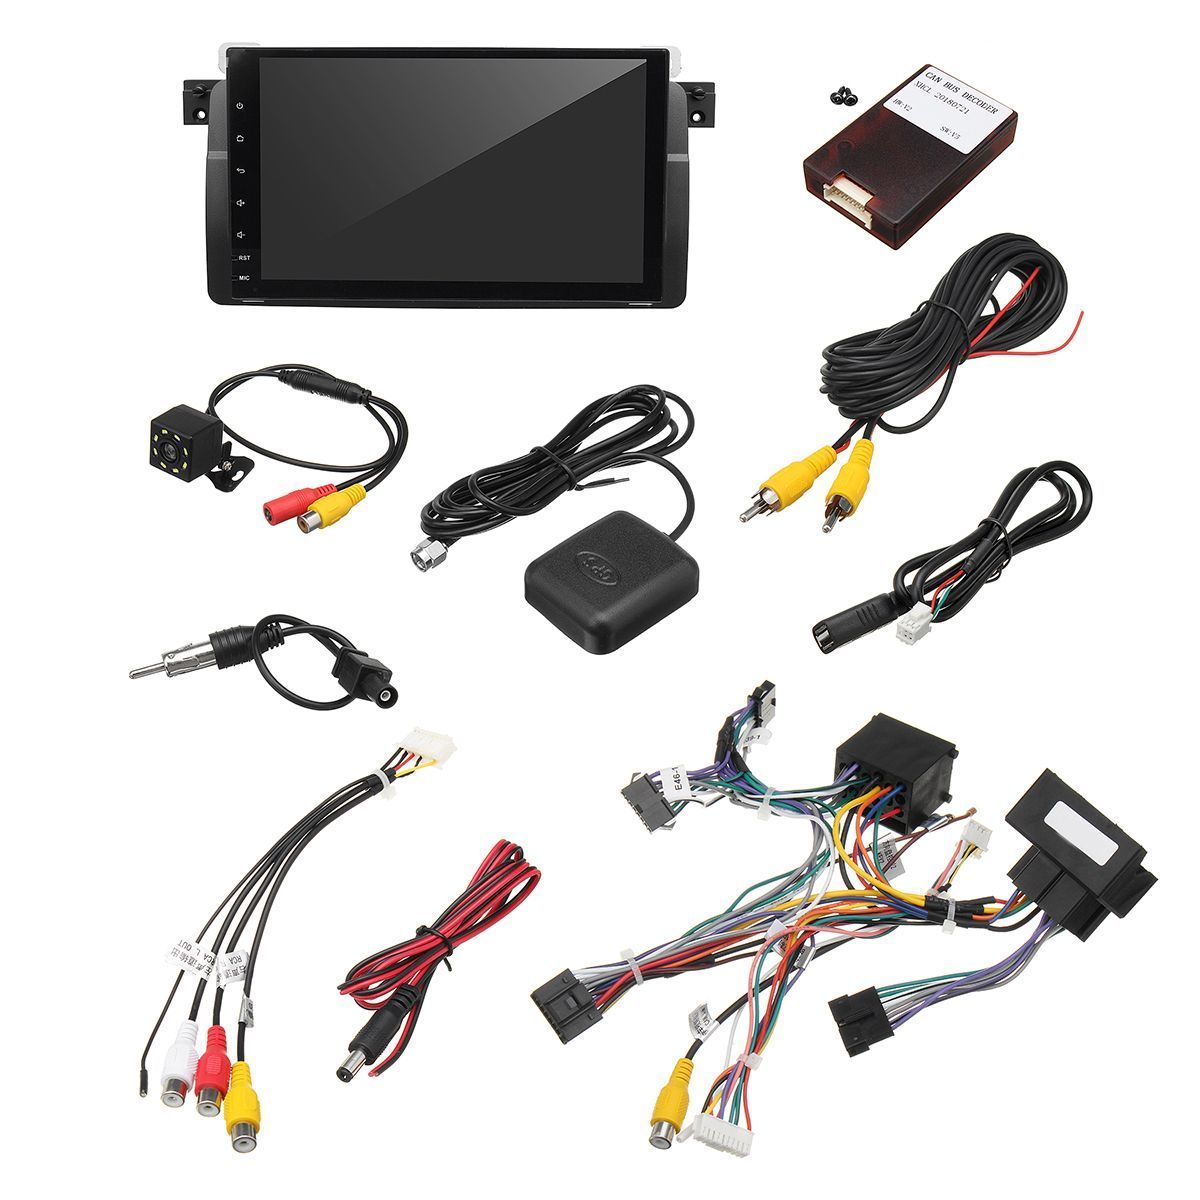 9-Inch-2DIN-For-Android-80-Car-Stereo-Radio-116G-WiFi-GPS-Sat-Navigation-OBD-DAB-with-4LED-Camera-Fo-1362158